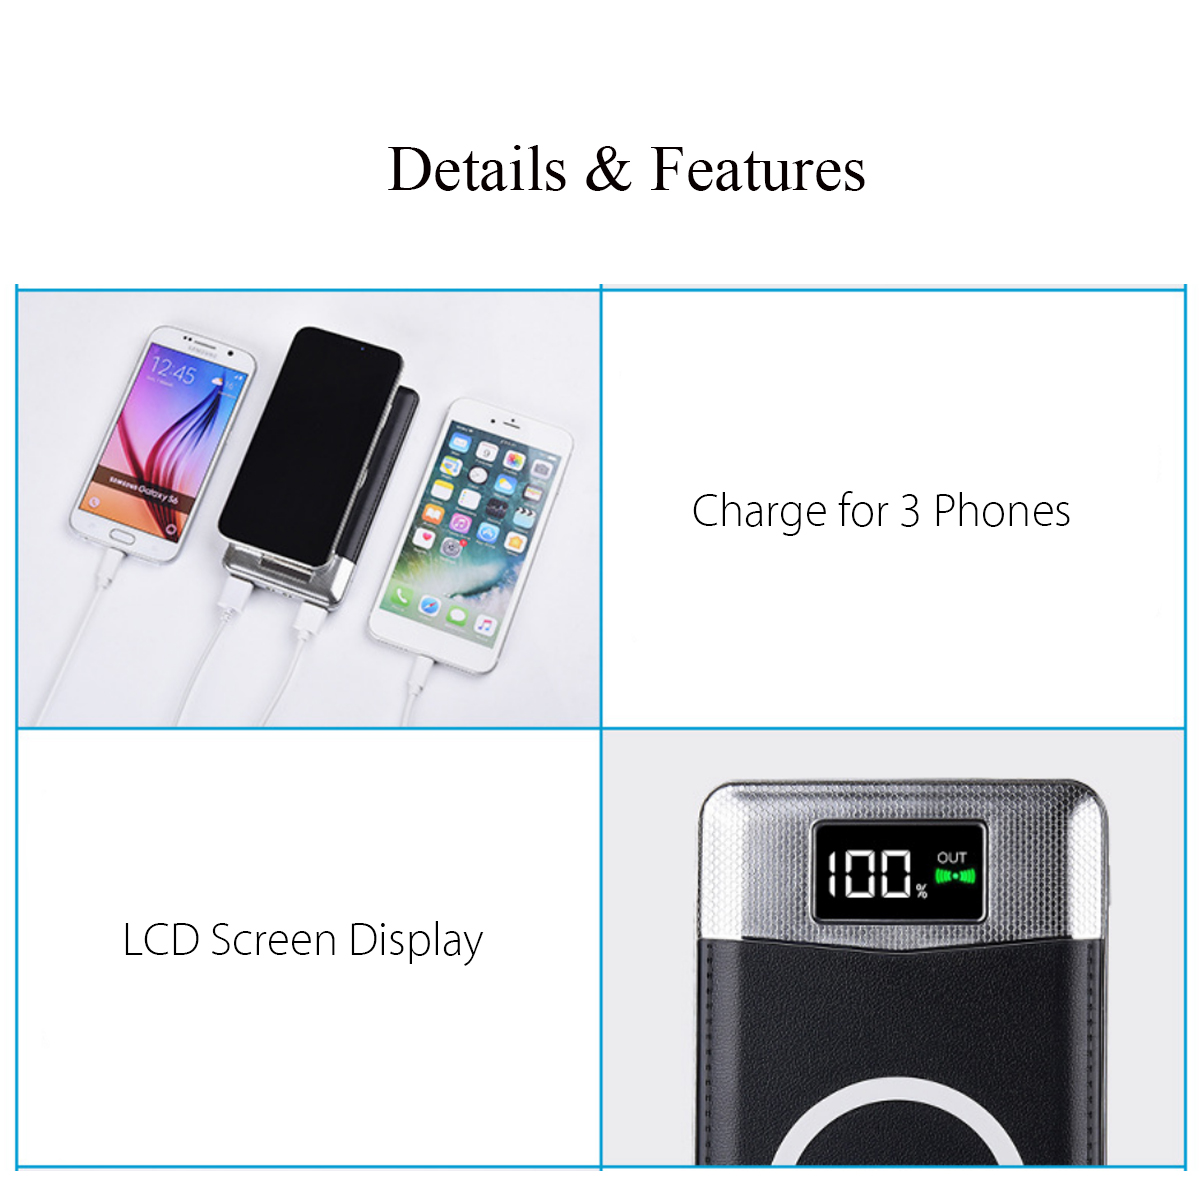 1000mAh-QI-Wireless-Charging-Charger-Power-Bank-DIY-Plastic-Case-Case-With-Flashlight-1277325